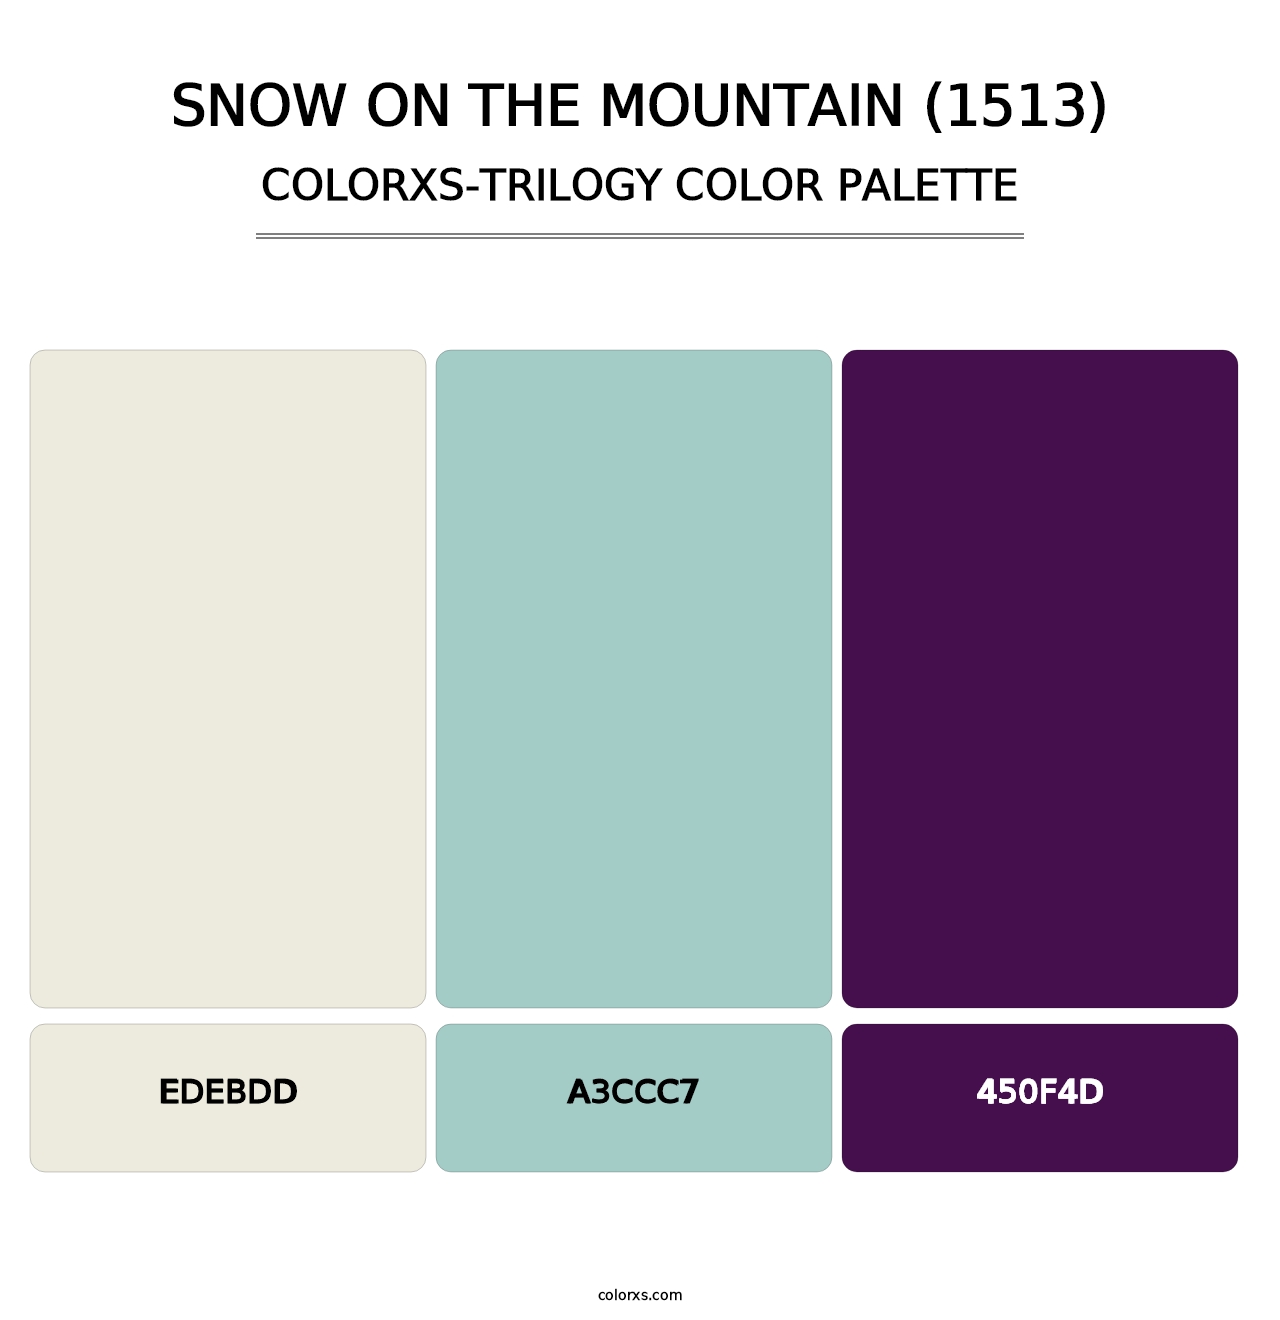 Snow on the Mountain (1513) - Colorxs Trilogy Palette